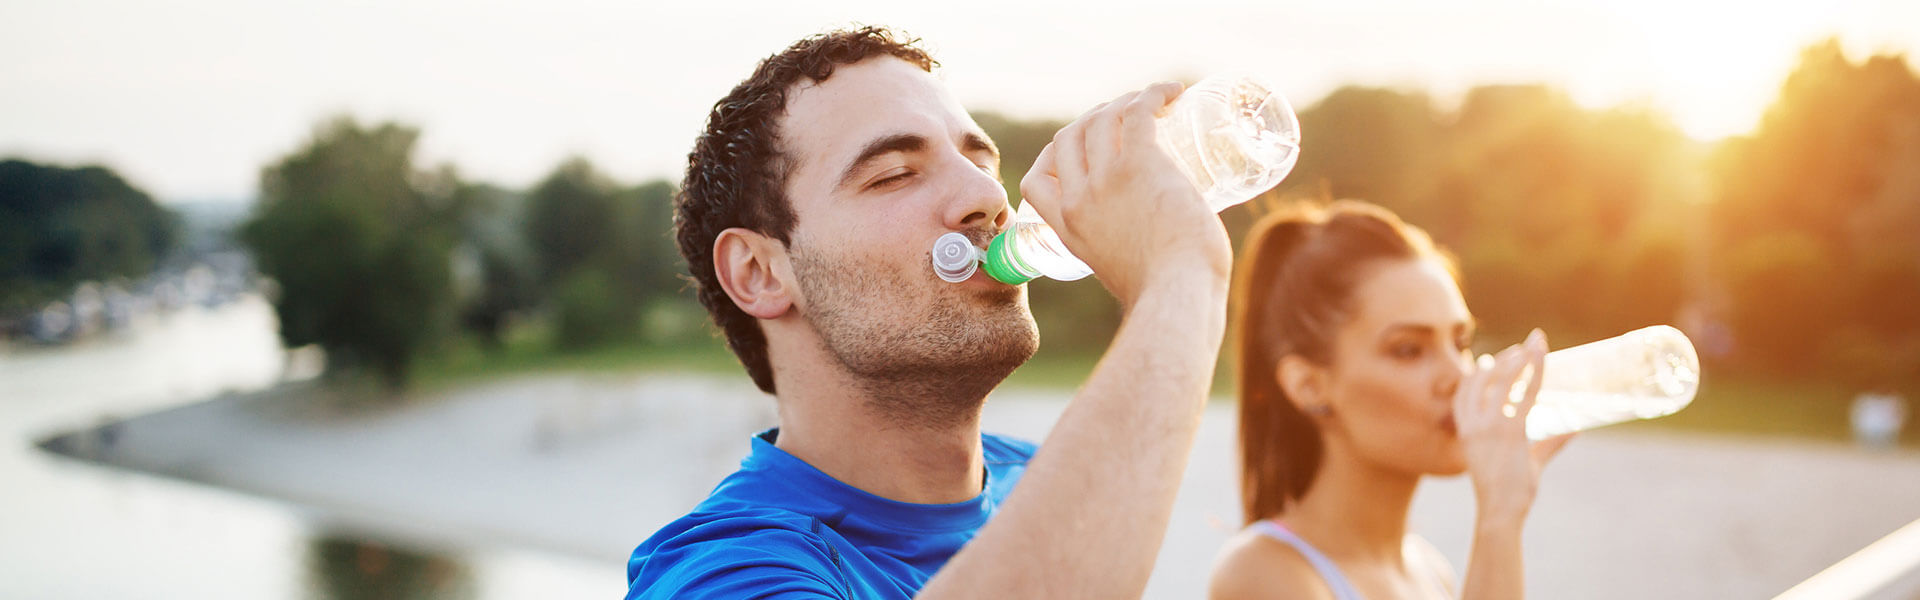 6 Dehydration Facts that May Surprise You